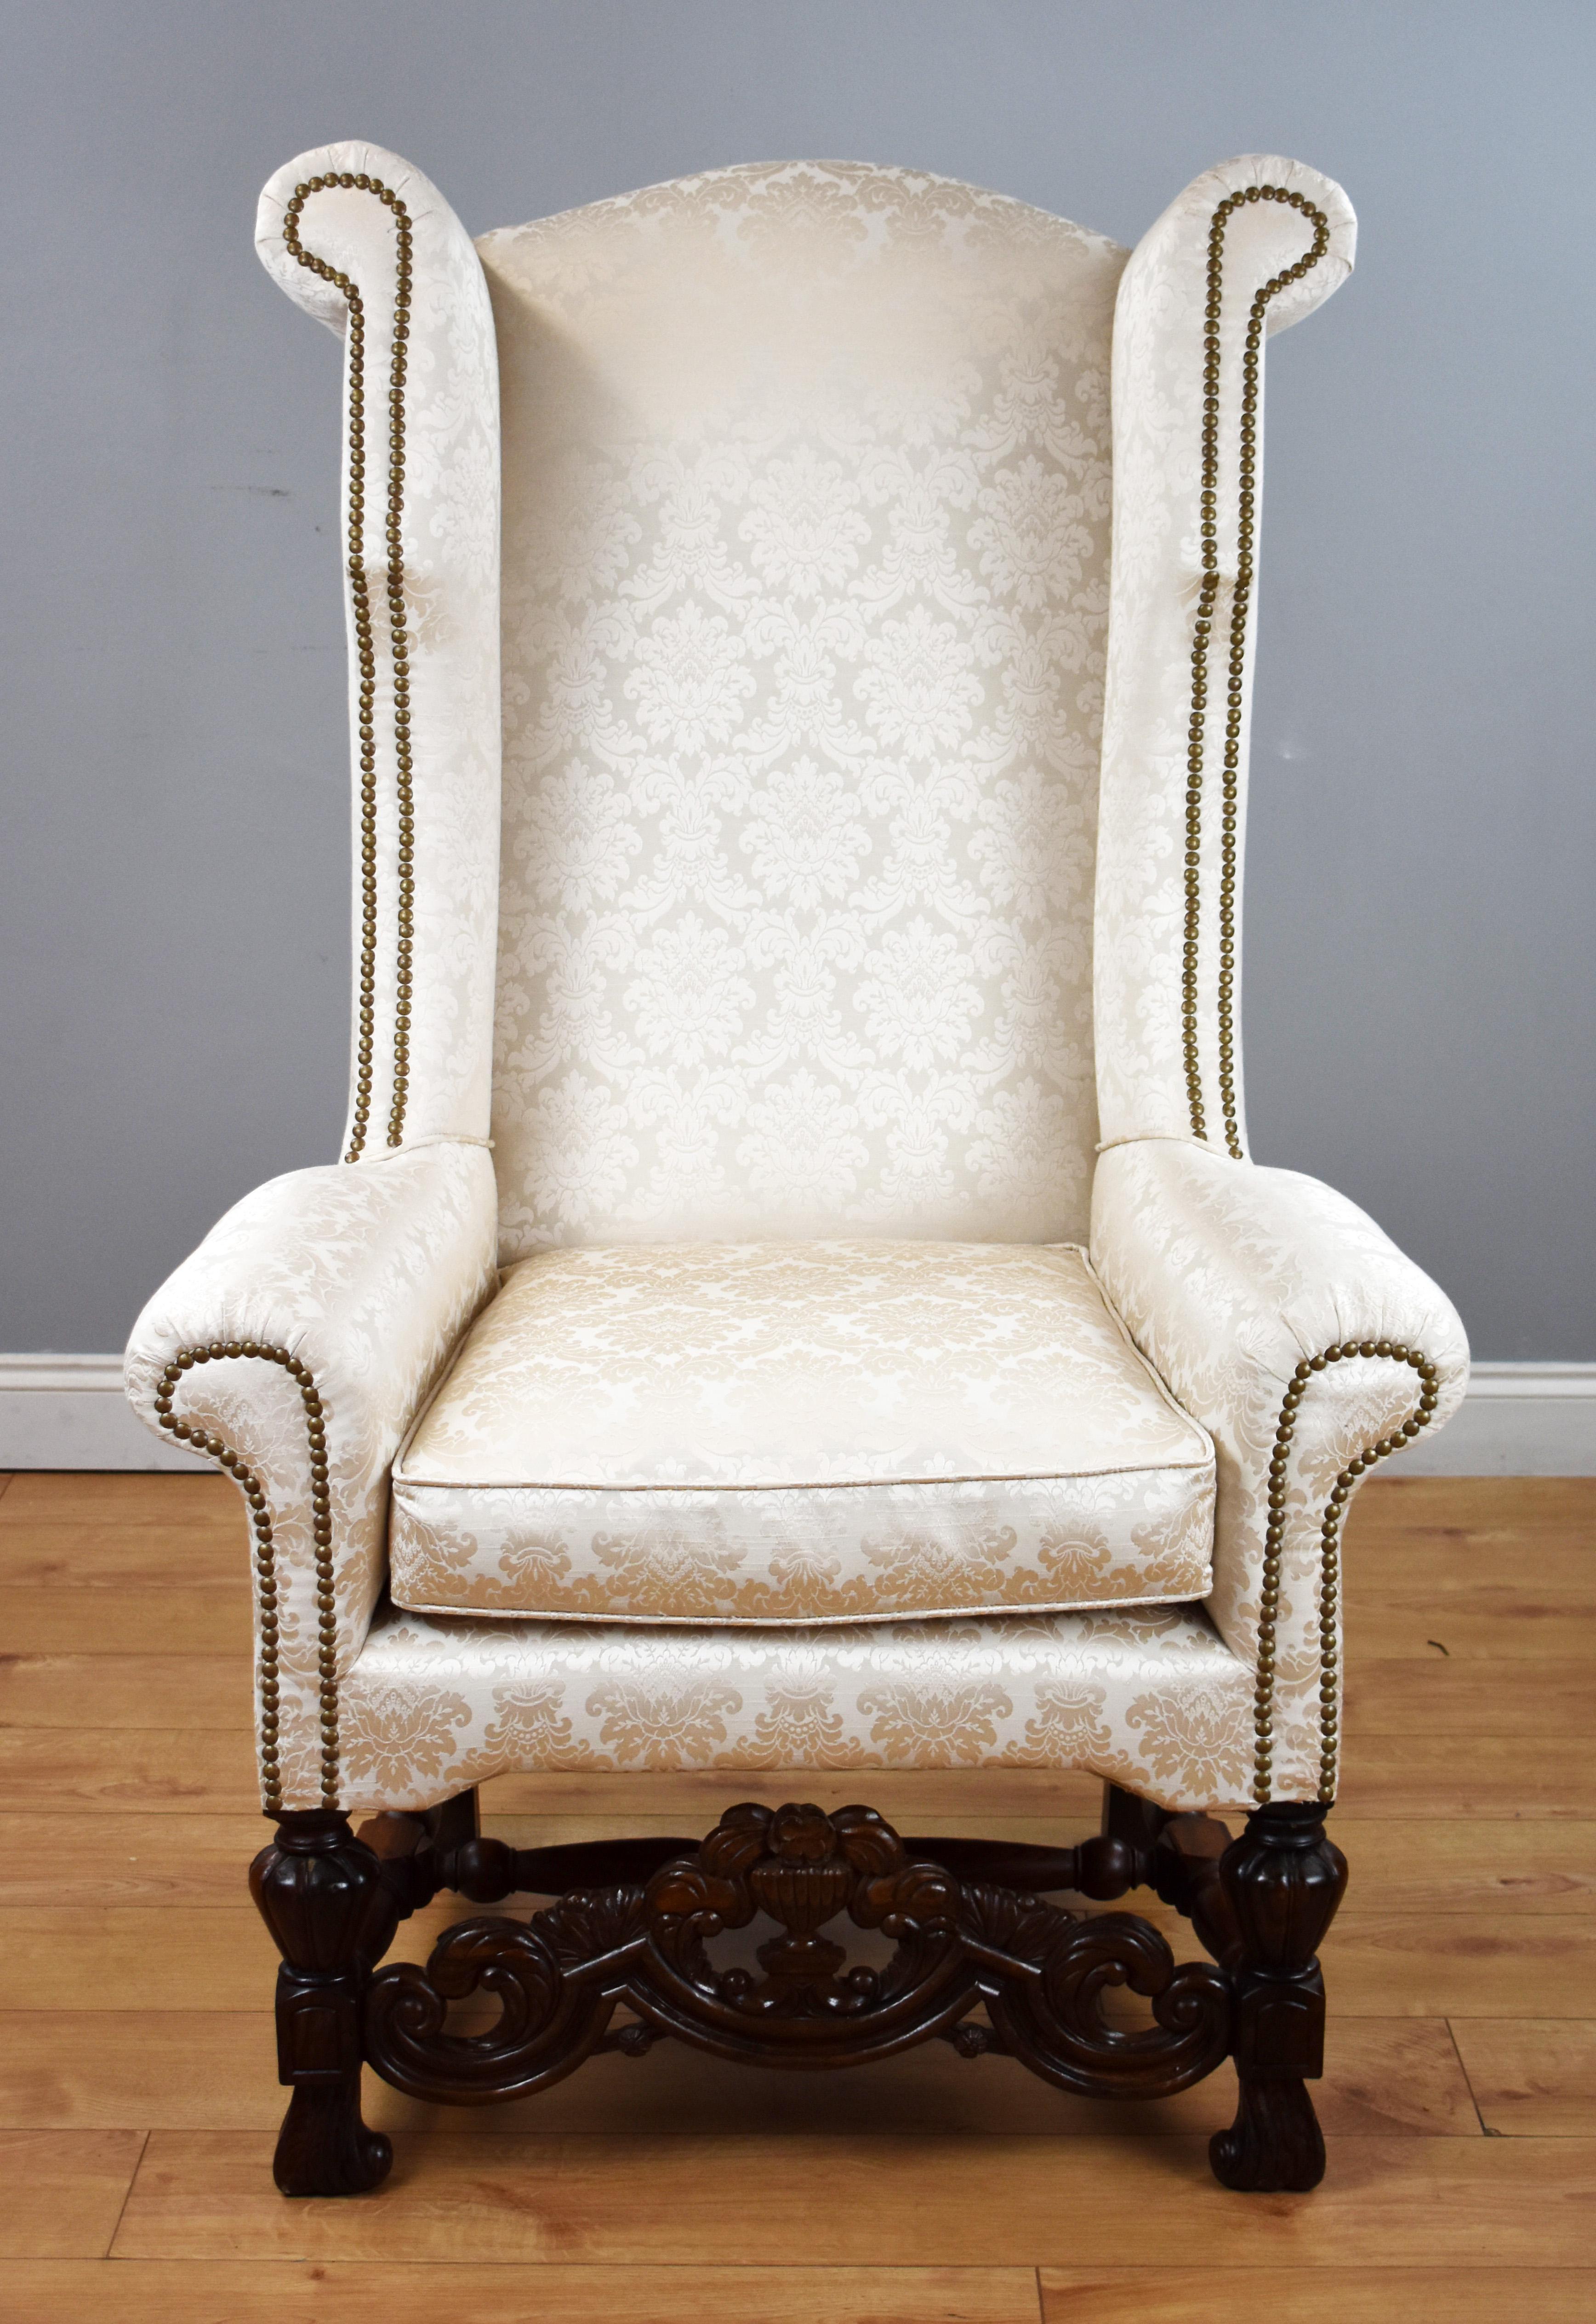 For sale is a good quality 19th century Carolean style wing back armchair, with a high back above a cushion seat with an ornately carved stretcher below uniting turned legs. The chair is in very good condition for its age.

Measures: Width 35